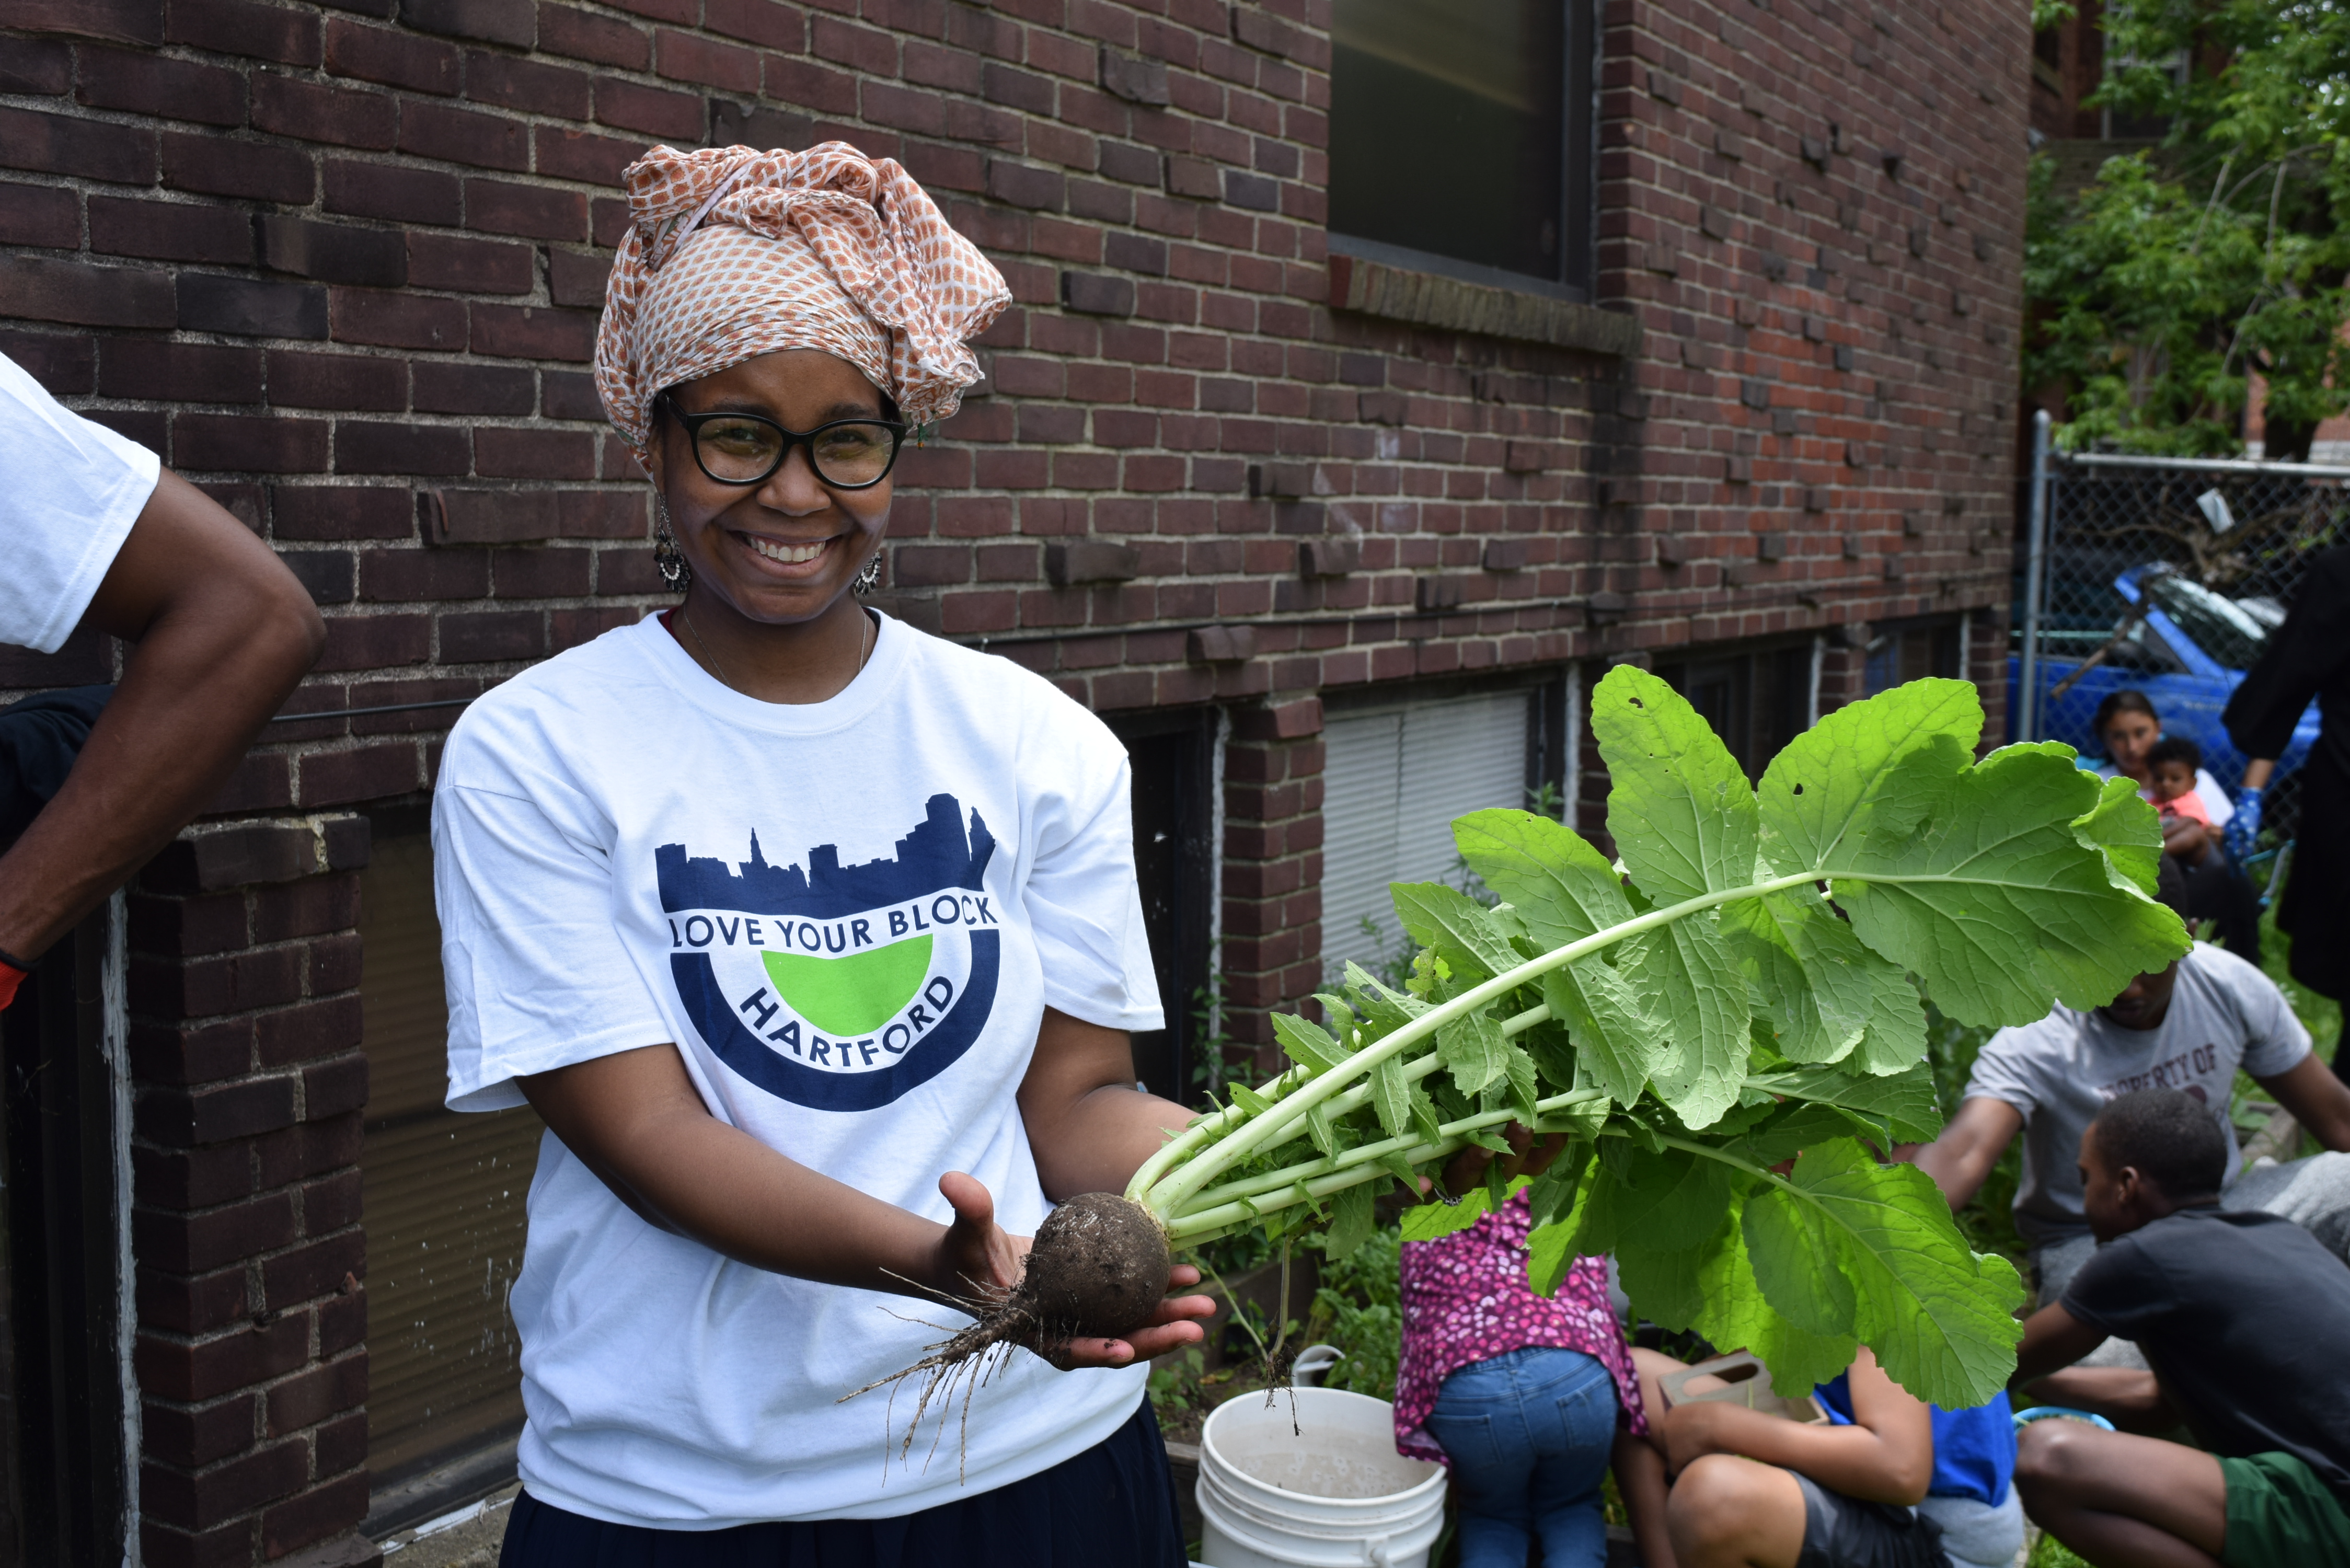 Love Your Block Project Lead for the Grand Street Community Garden Jameelah Muhammad